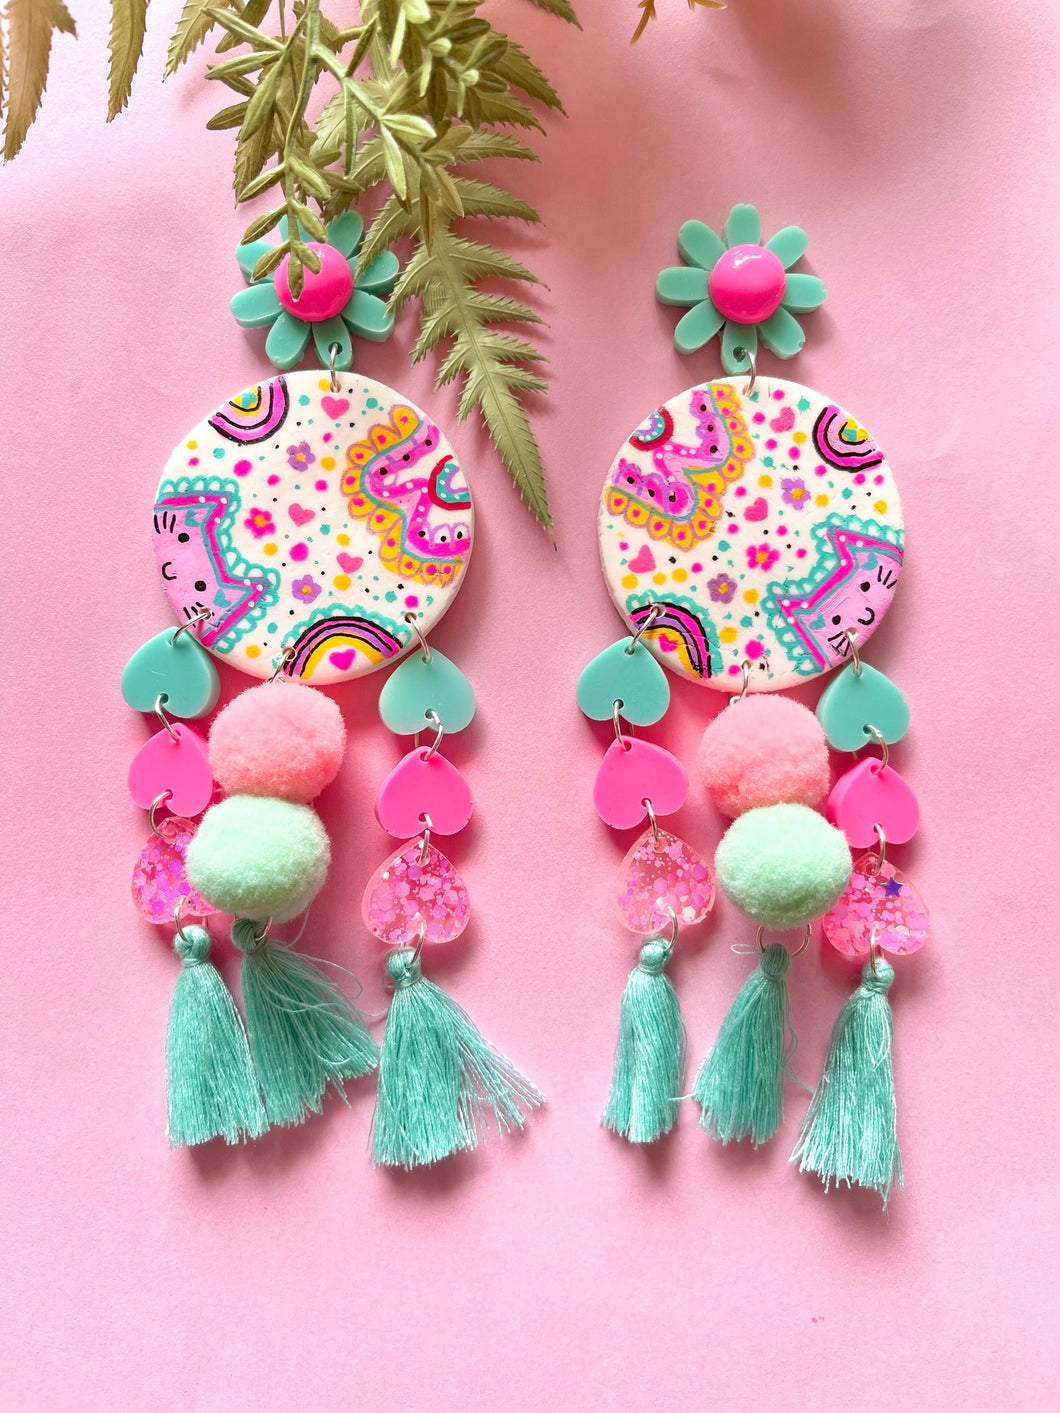 Kitty land aqua mint and pink statement earrings